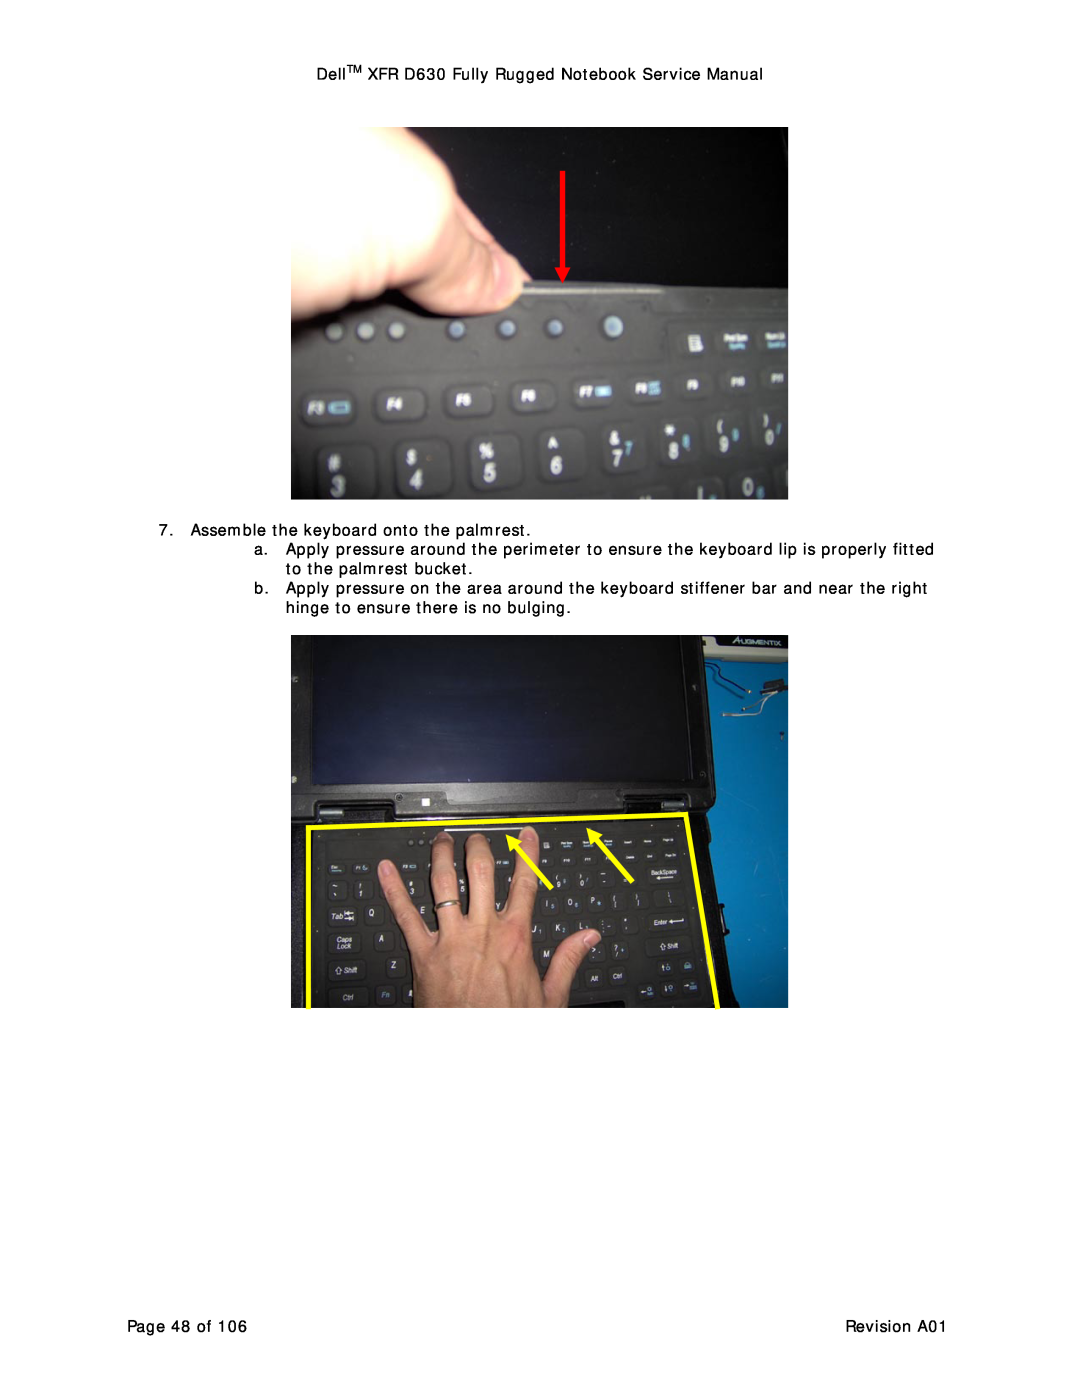 Dell DellTM XFR D630 Fully Rugged Notebook Service Manual, Assemble the keyboard onto the palmrest, Page 48 of 